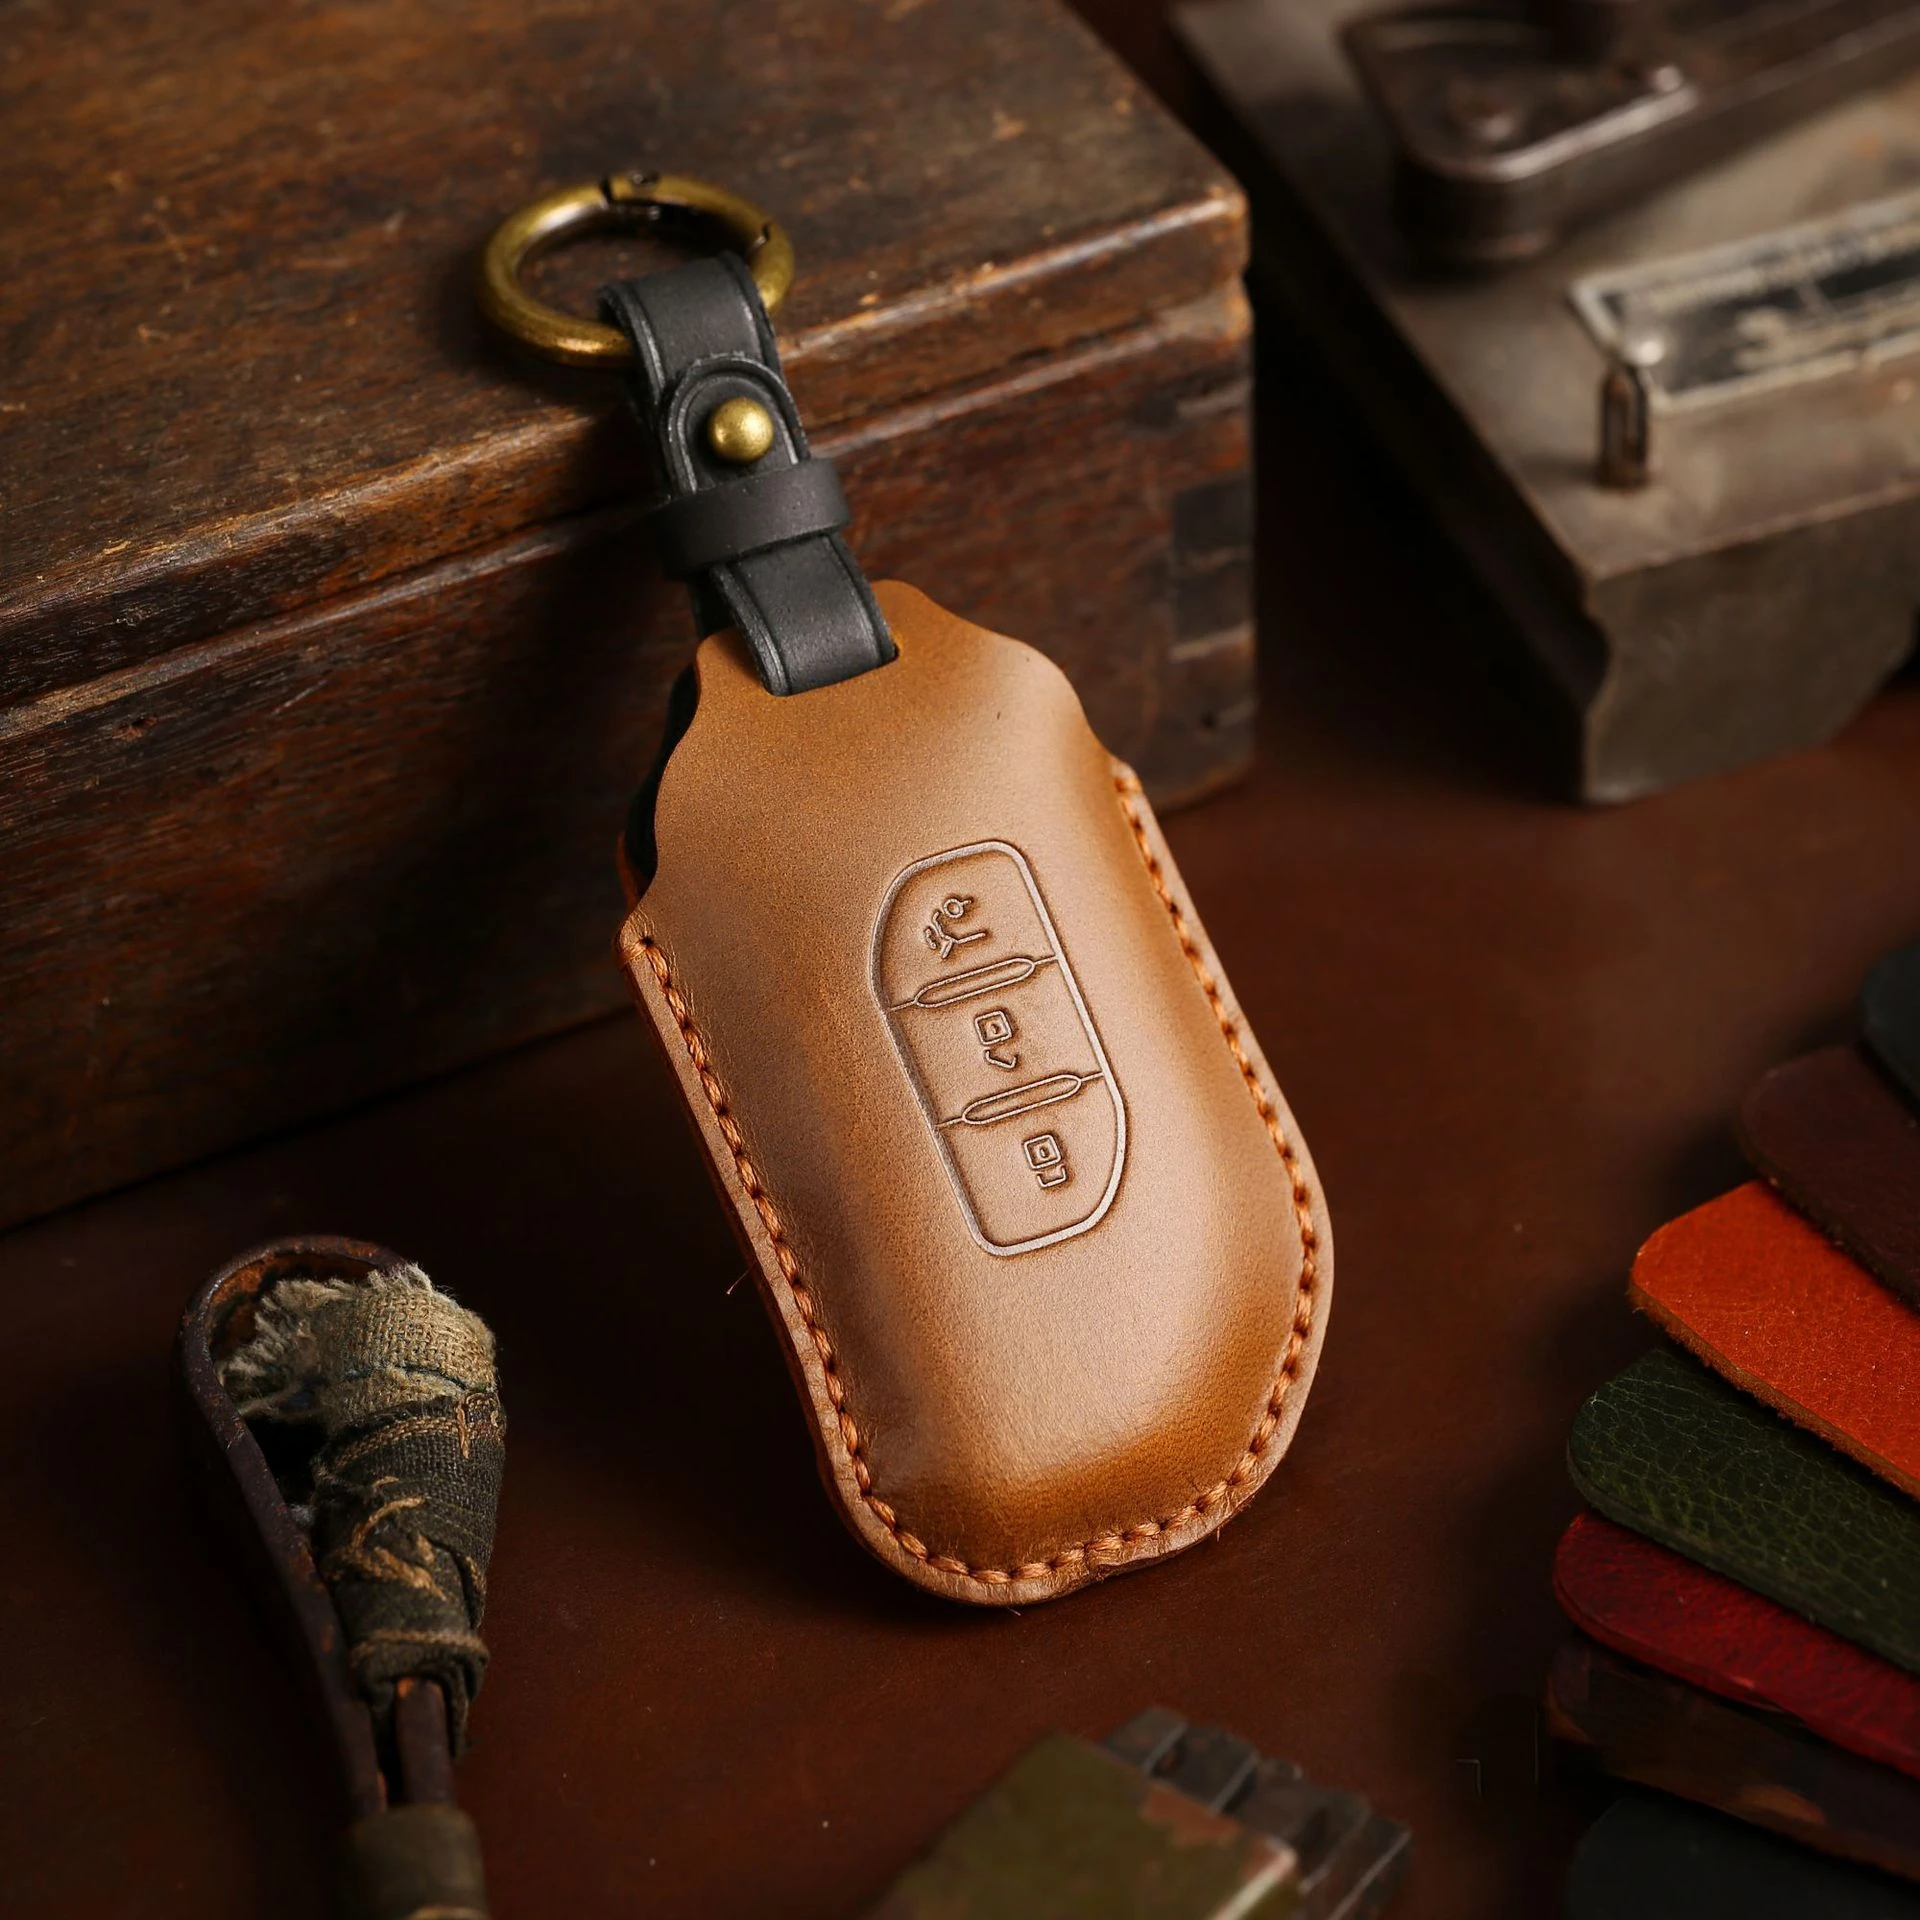 

Luxury Leather Car Key Pouch Case Cover Fob Protector Keyring Accessories for Dongfeng Forthing Evo T5 Keychain Holder Shell Bag